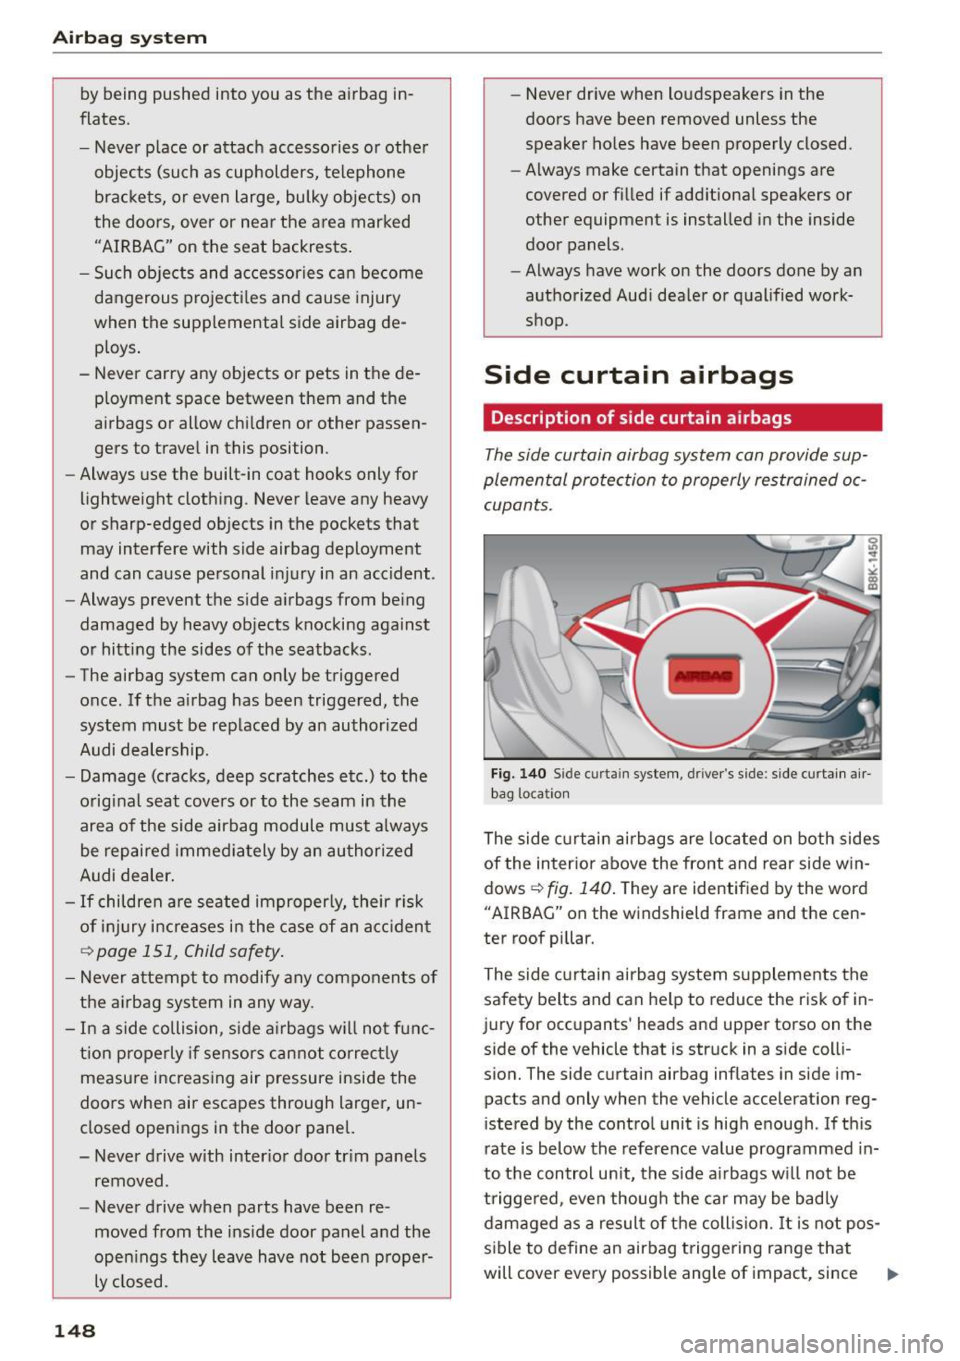 AUDI A5 2015  Owner´s Manual Airb ag  syst em 
by being  pushed  into  you as t he airbag  in­
flates. 
- Never p lace or  attach  accessories or other 
objects  (such as cupholders,  telephone  brackets,  or  even large,  bulky